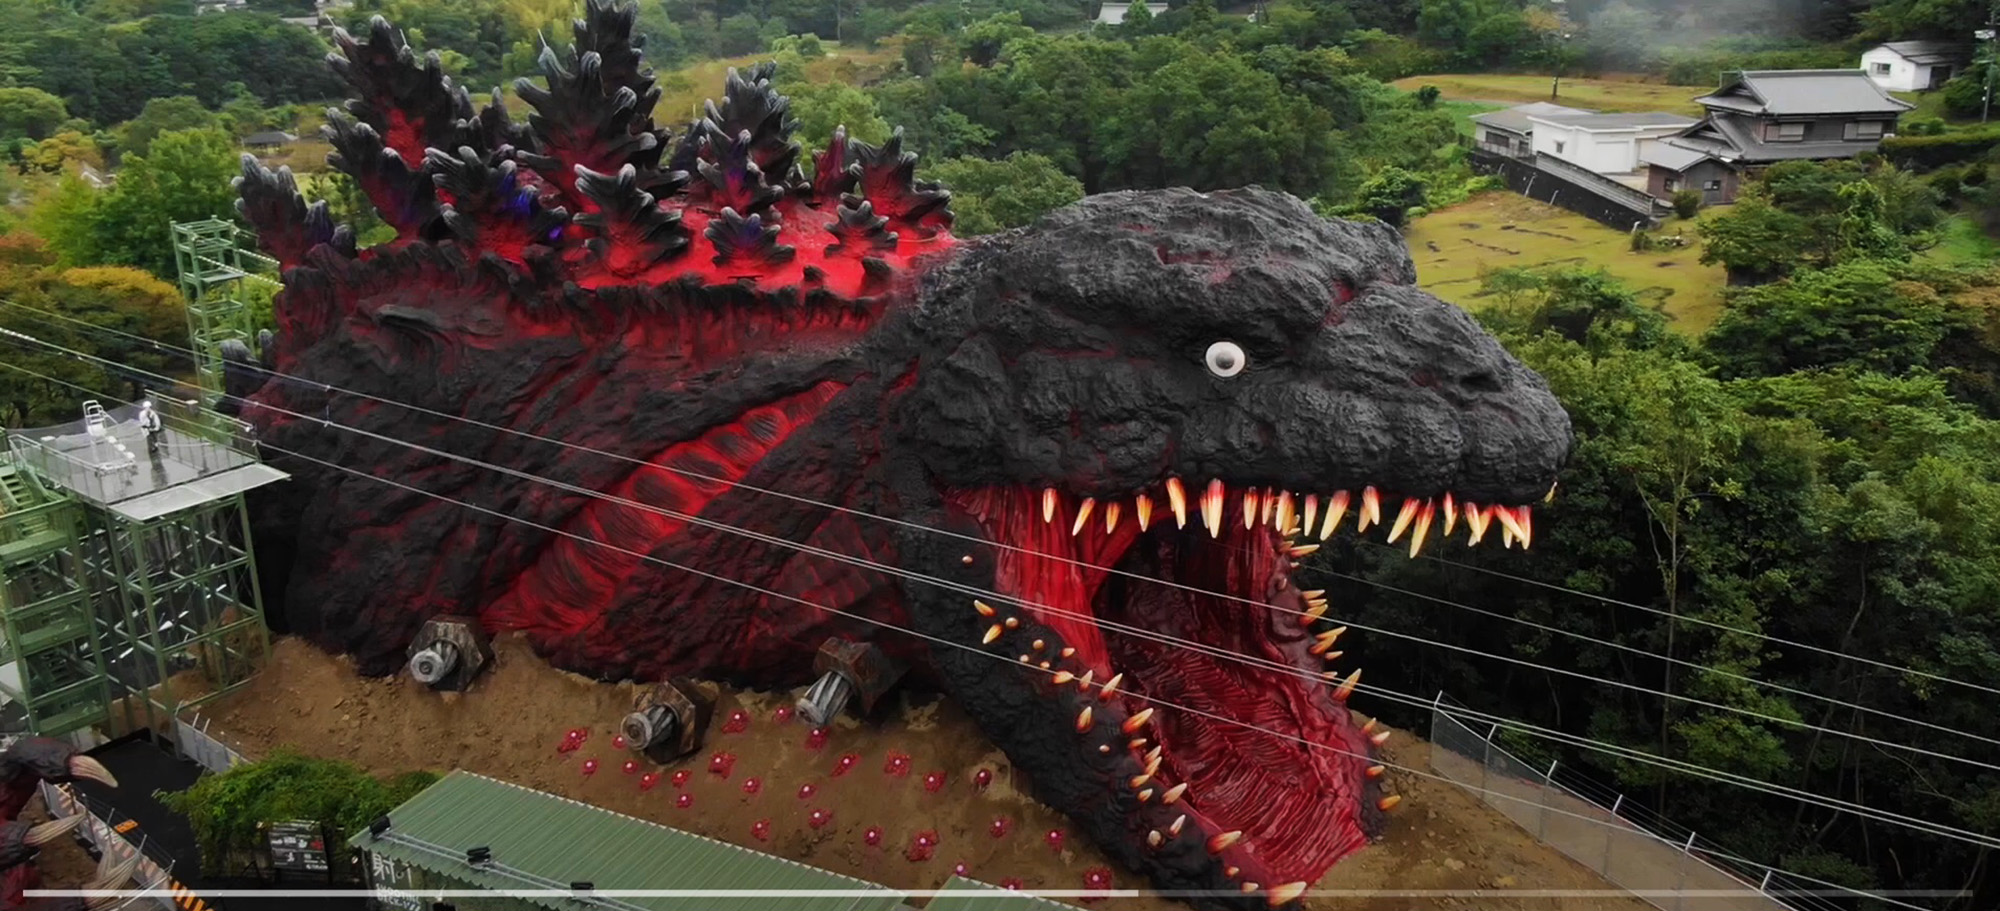 Read more about the article Laregest Godzilla Statue Is Latest Themed Ride In Japan